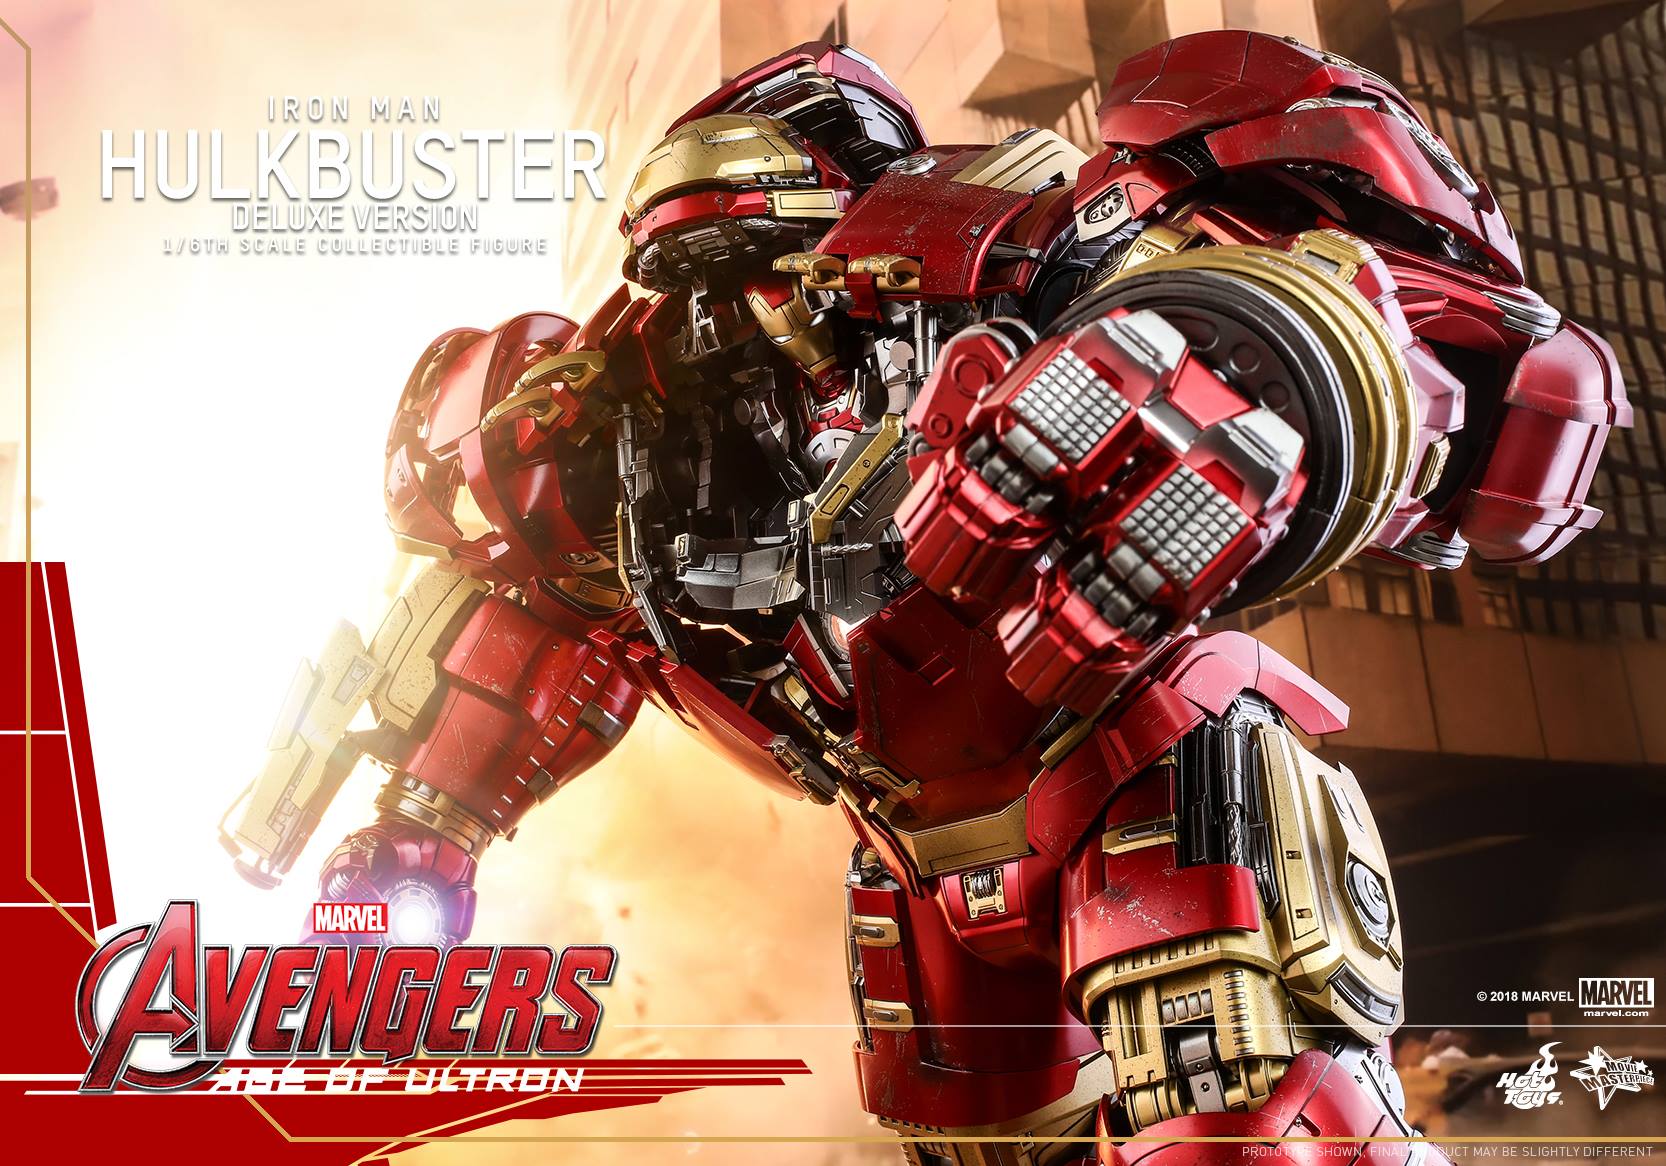 Hot Toys - MMS510 - The Avengers: Age of Ultron - Hulkbuster (Deluxe Version) - Marvelous Toys